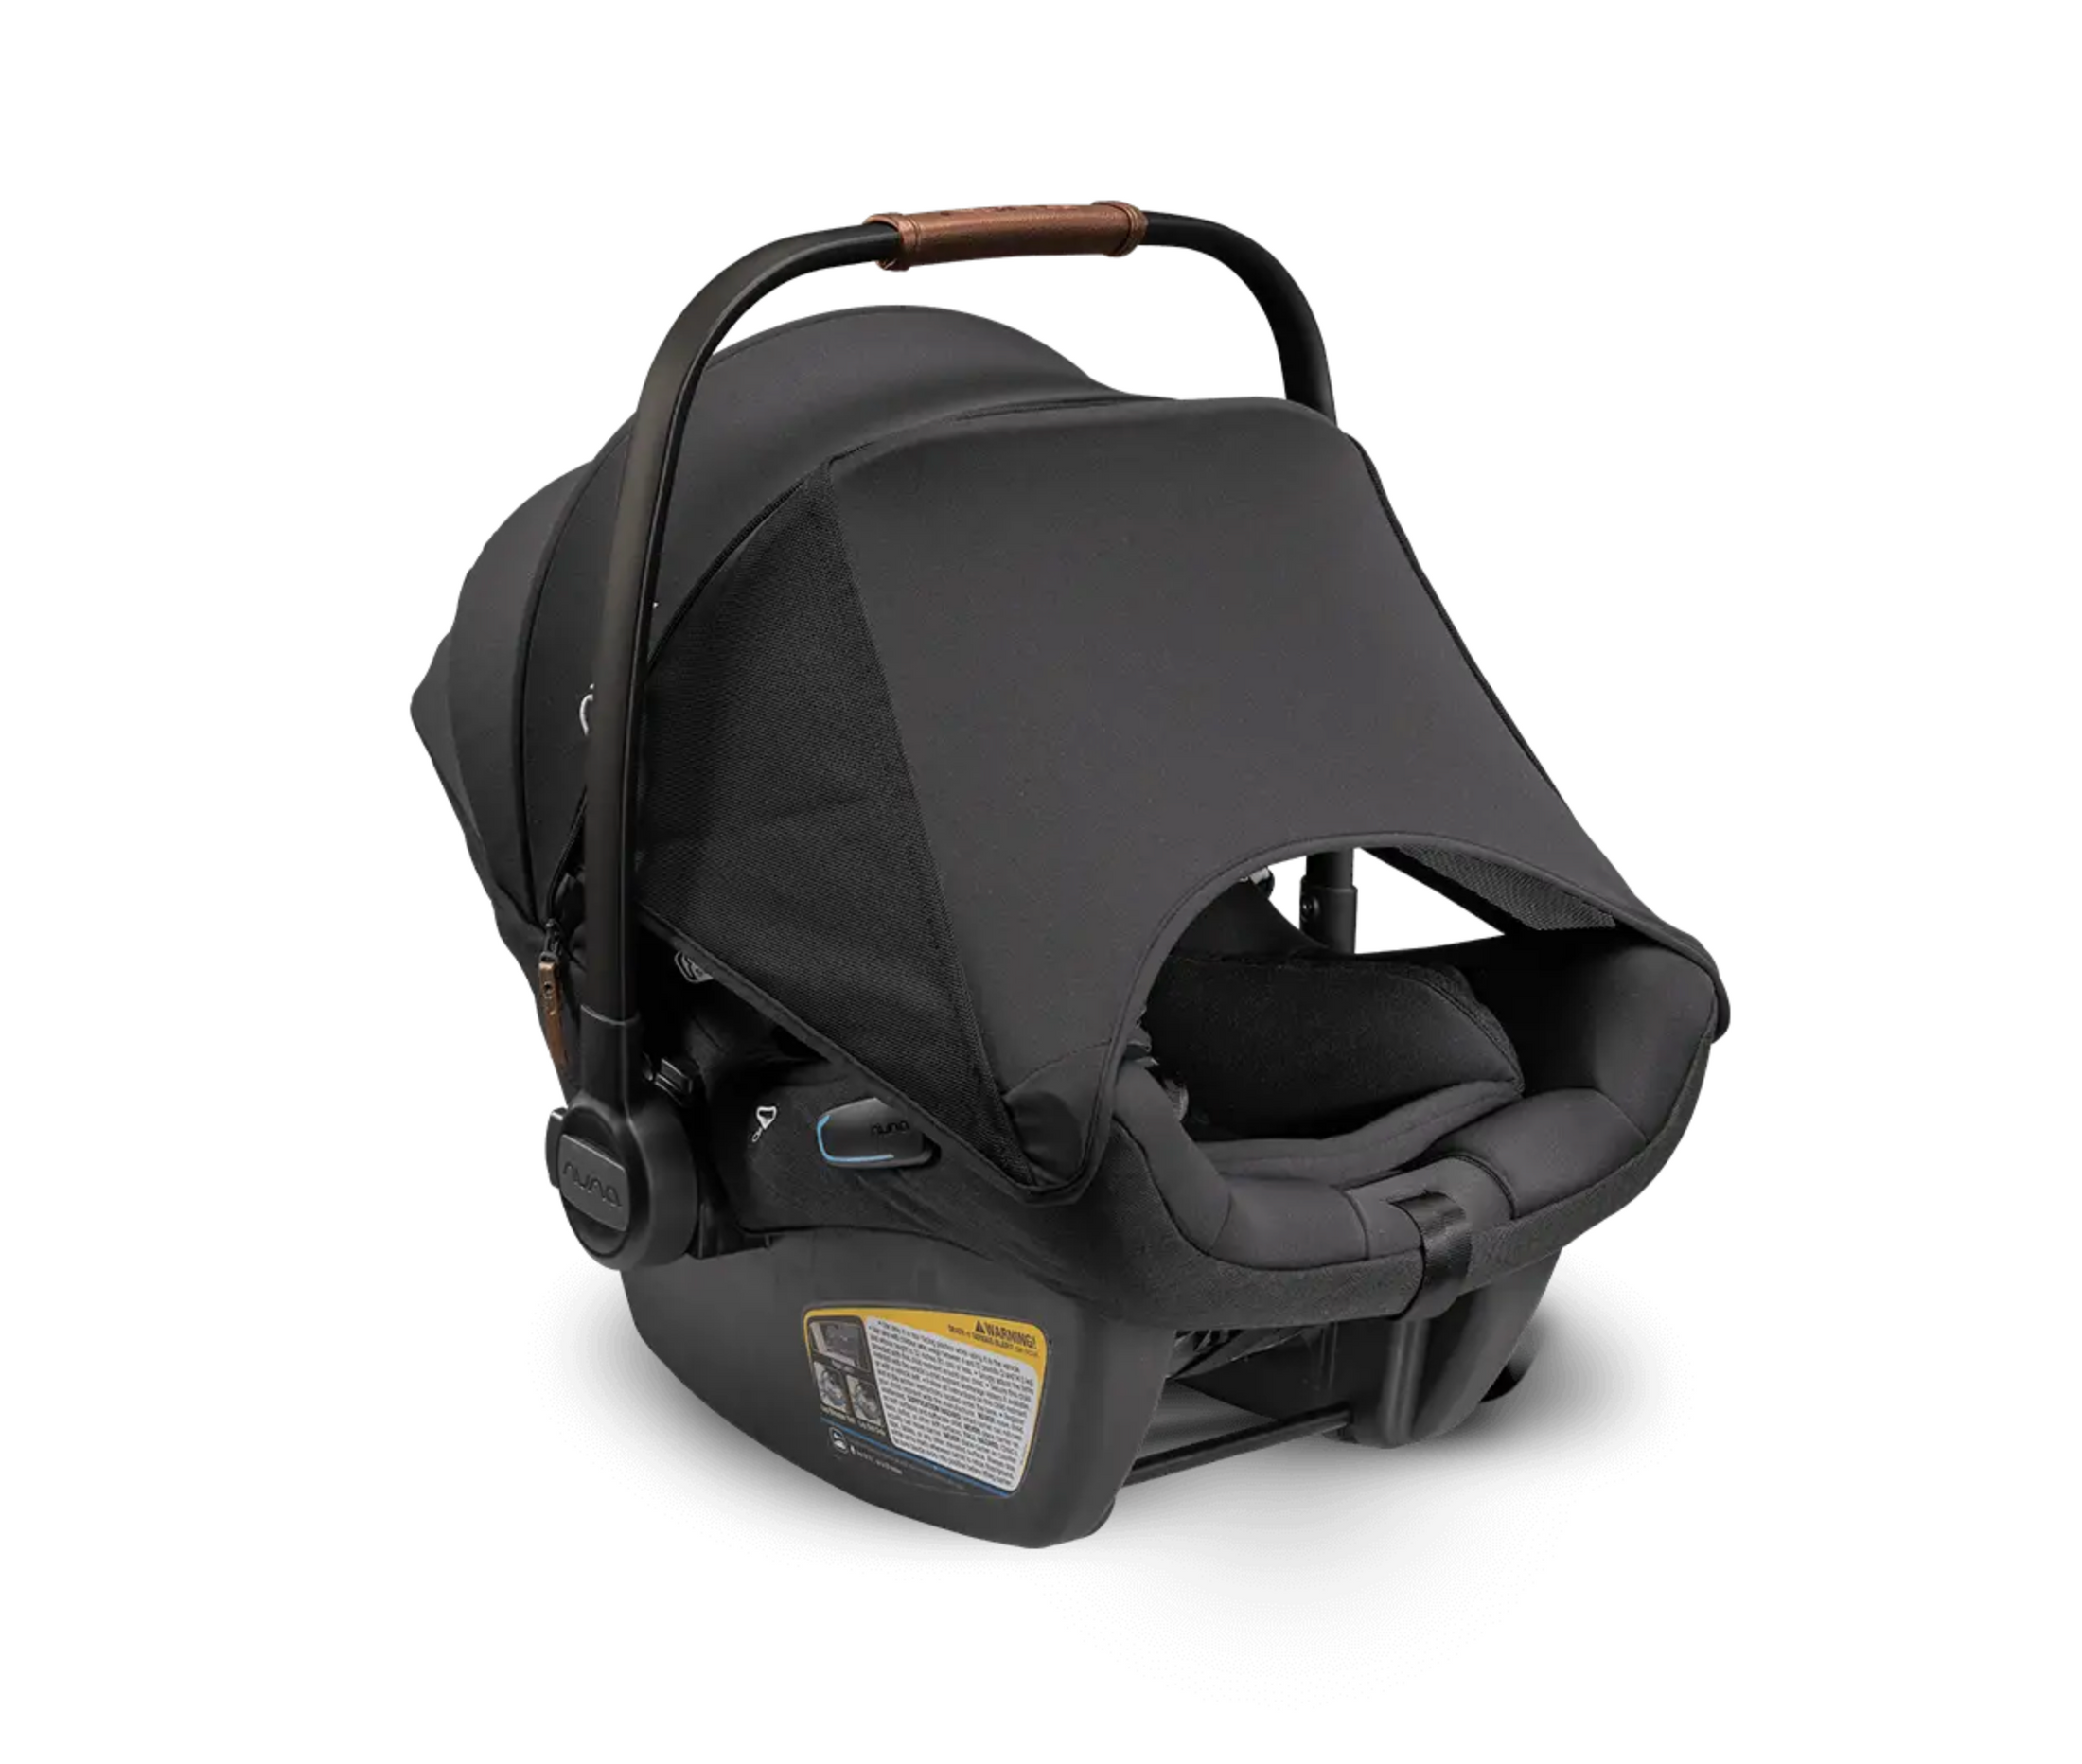 Mixx Next Stroller with Magnetic Buckle + Pipa RX - Caviar